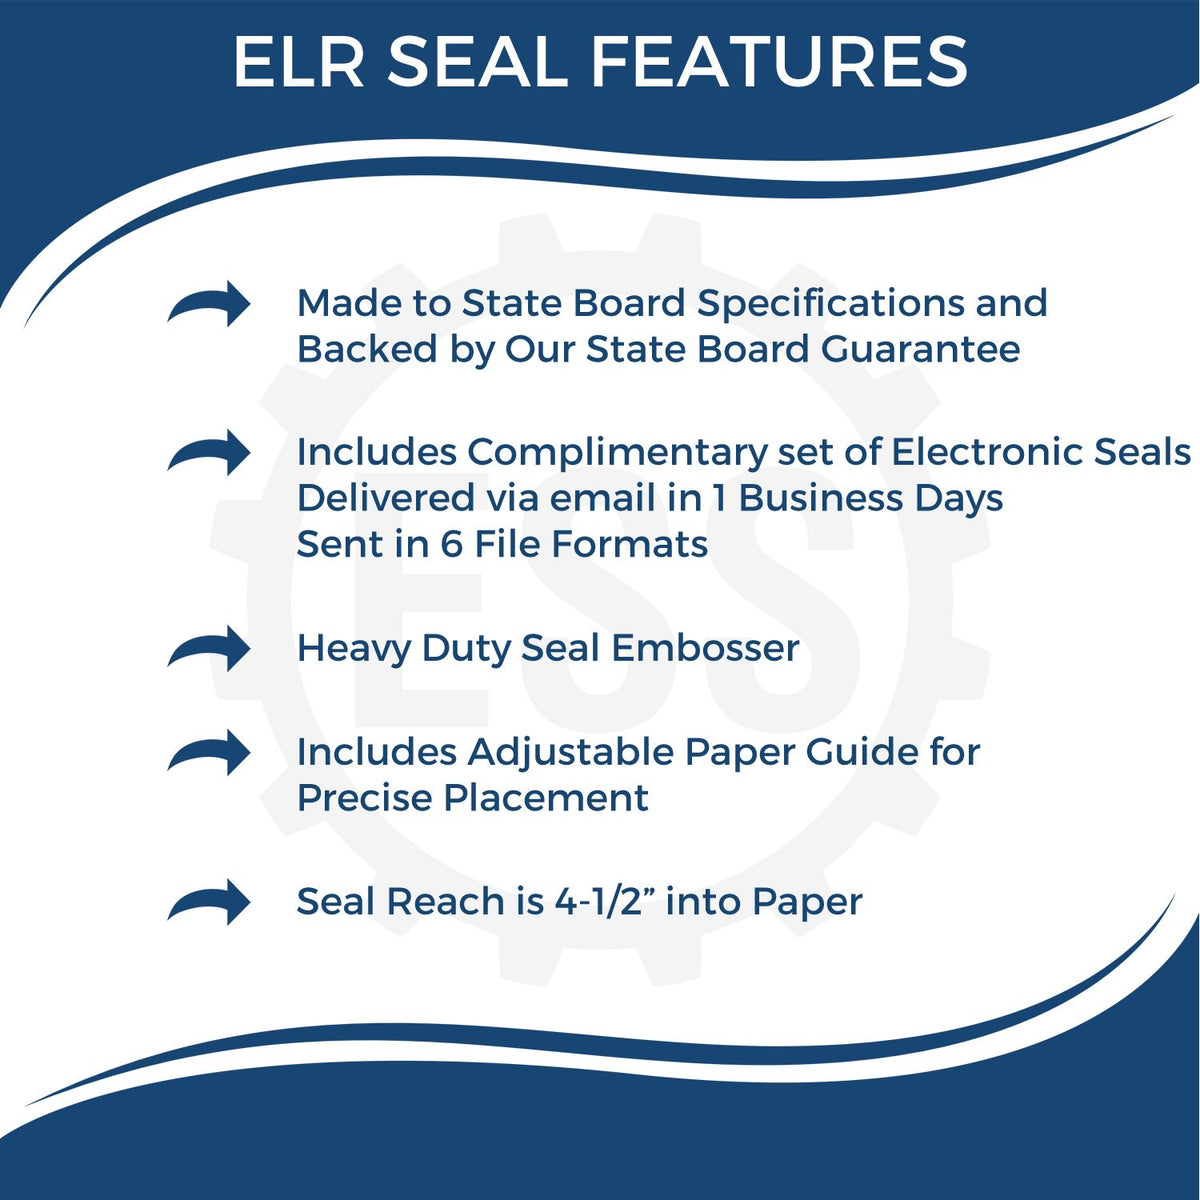 A picture of an infographic highlighting the selling points for the Extended Long Reach Delaware Architect Seal Embosser